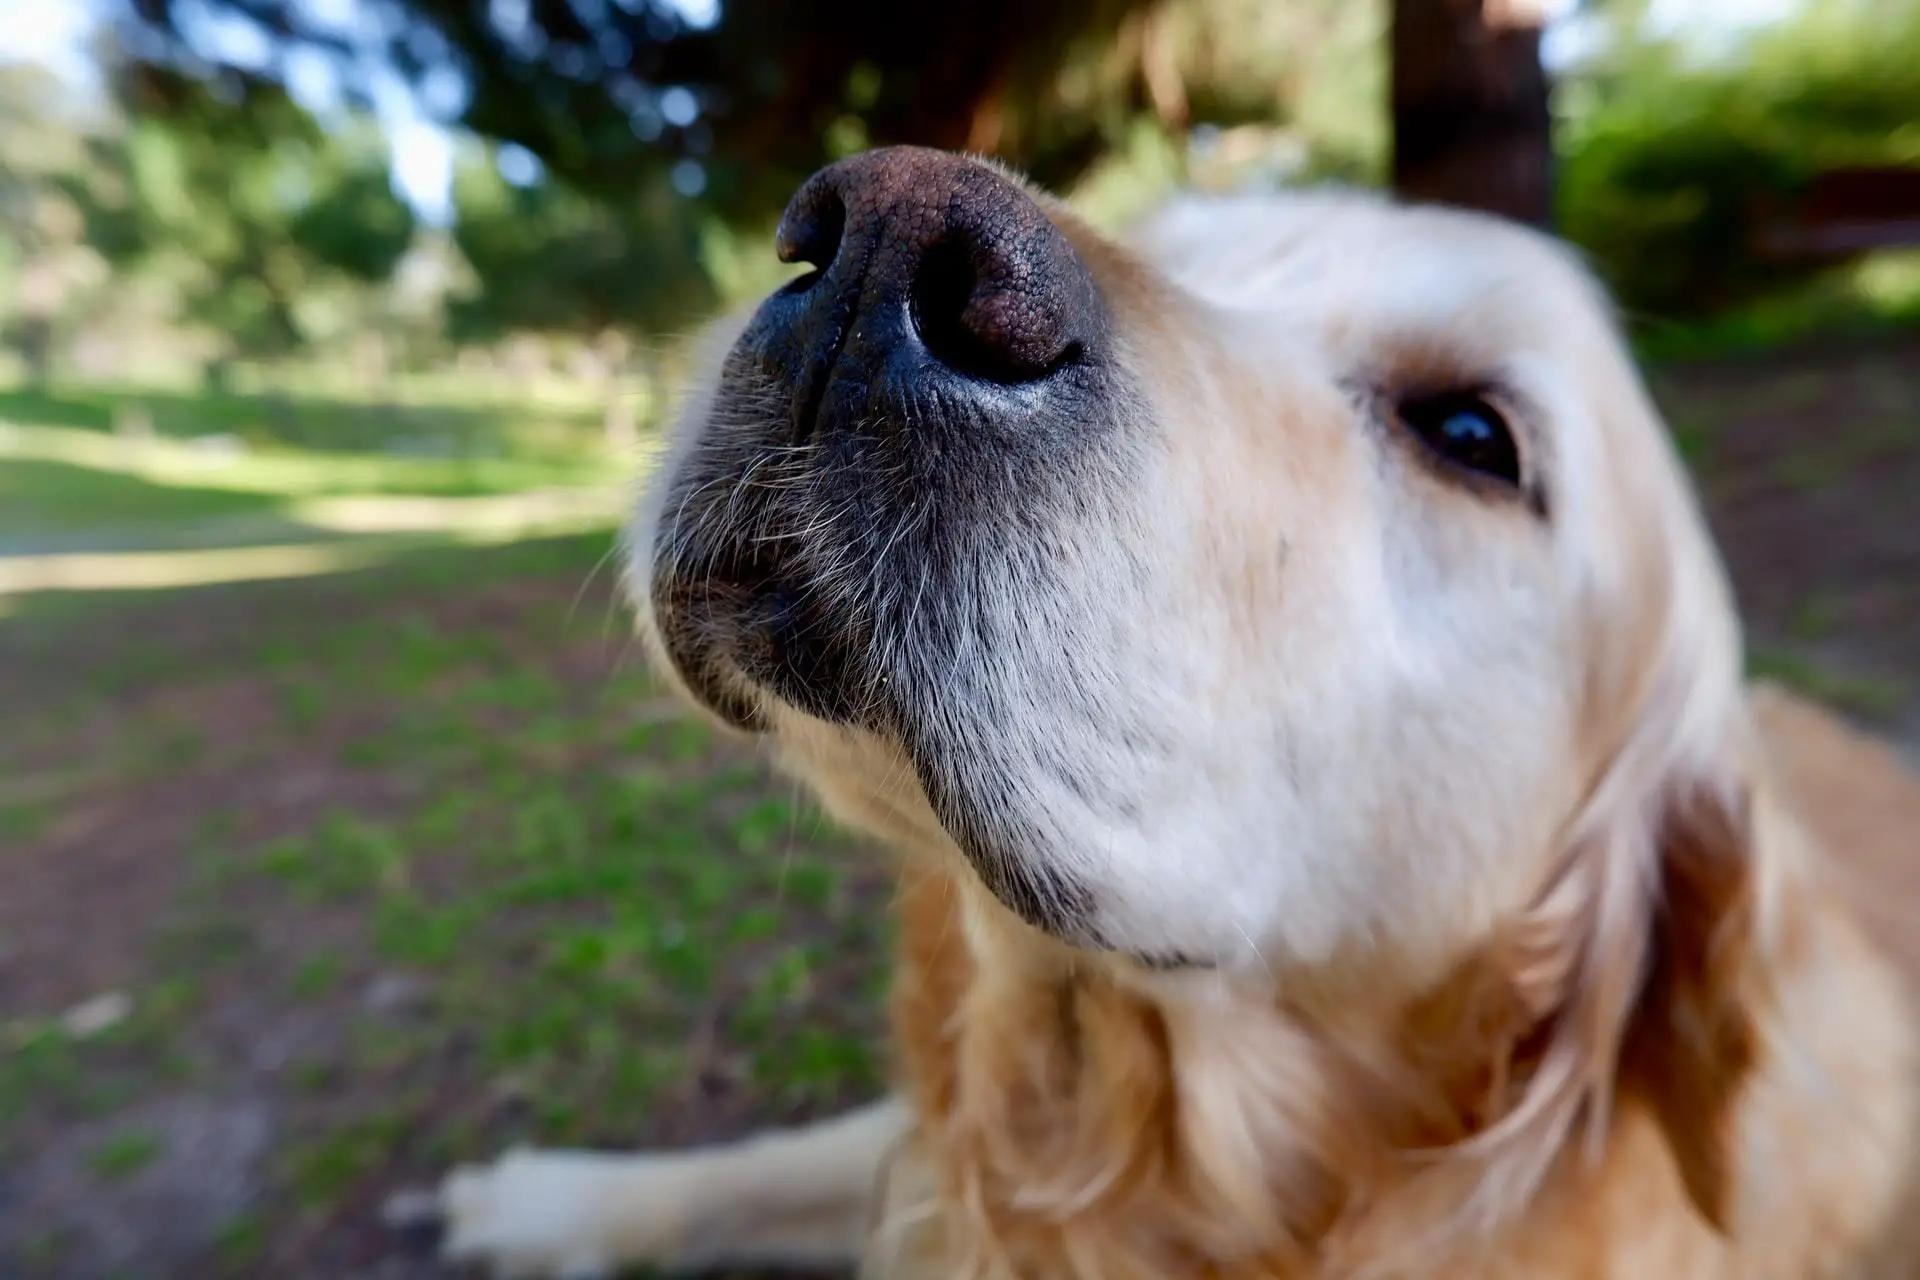 why does My golden retiever dog reverse sneeze so much?